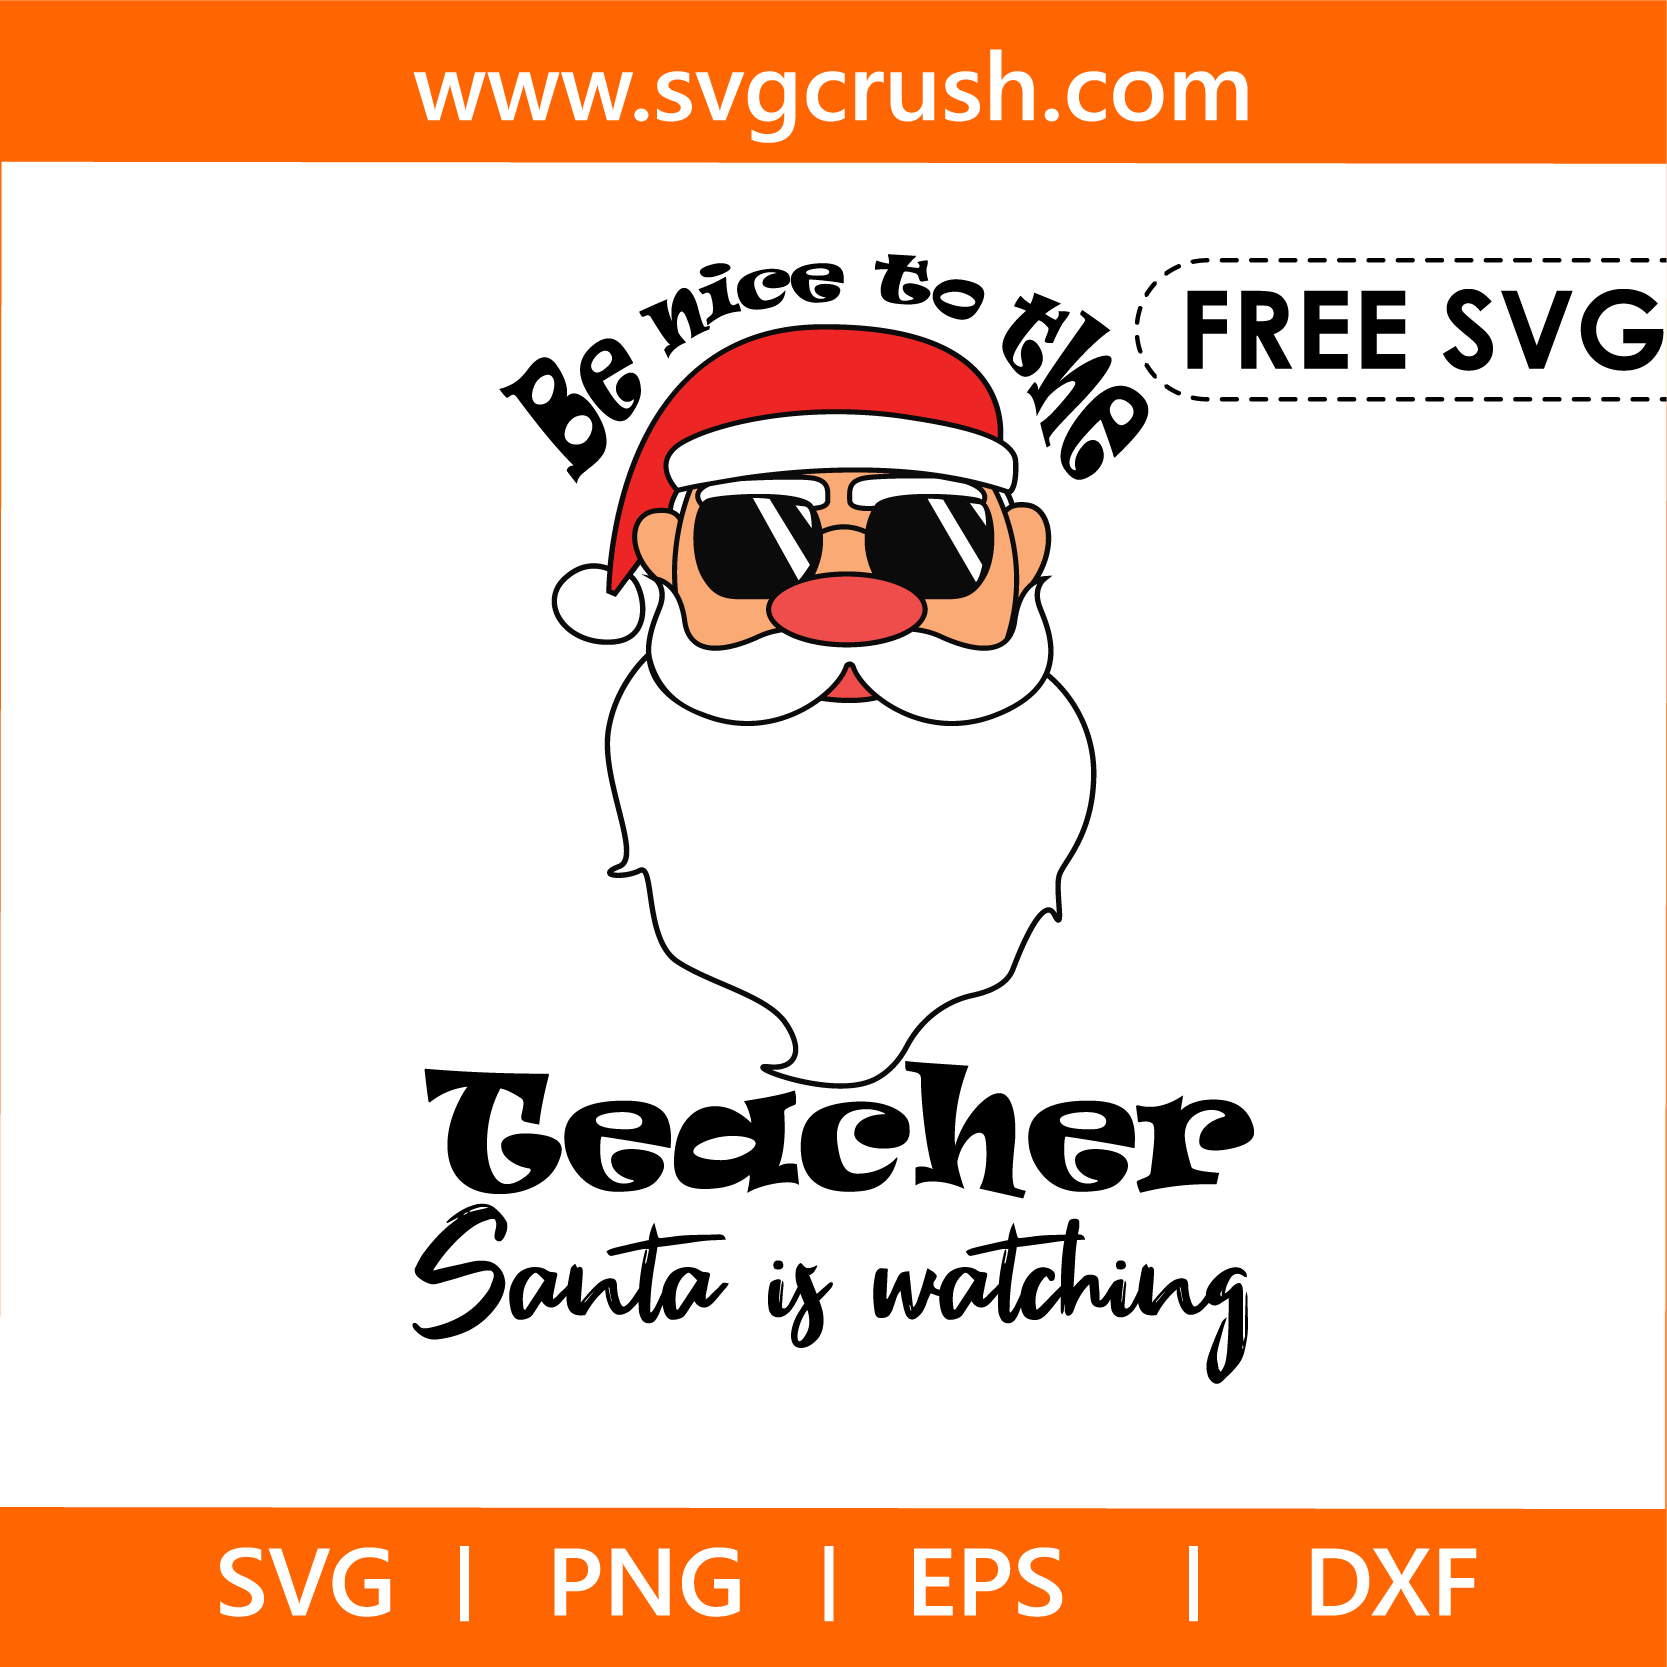 free be-nice-to-the-teacher-santa-is-watching-005 svg